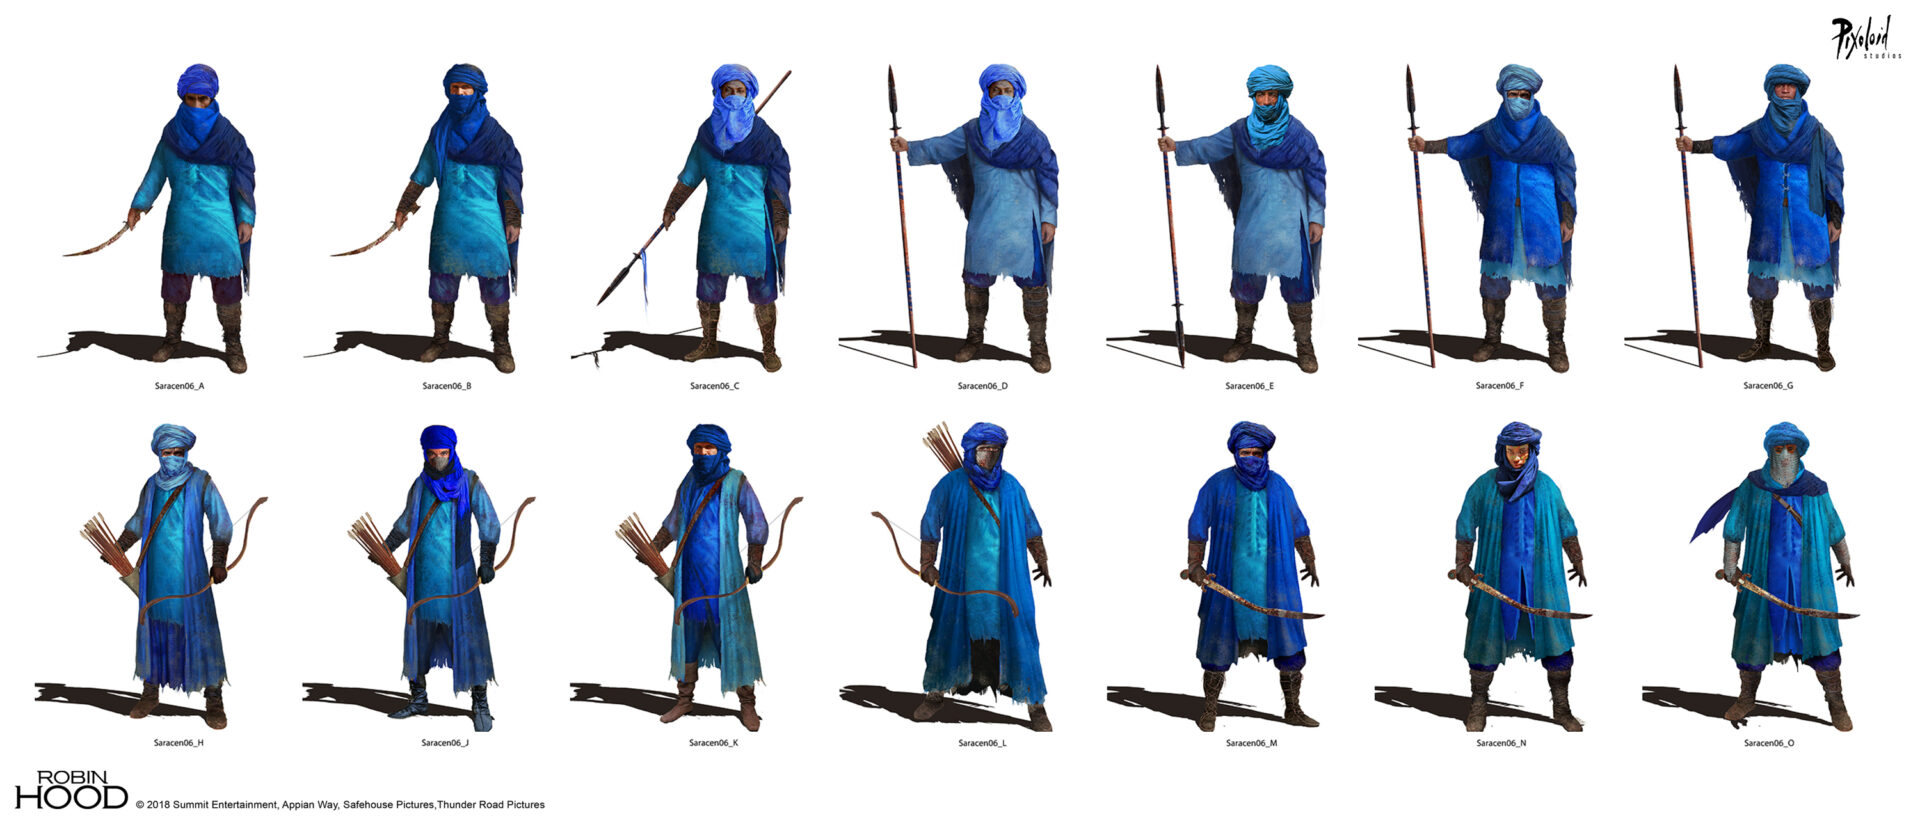 Saracen costume concepts for Robin Hood movie